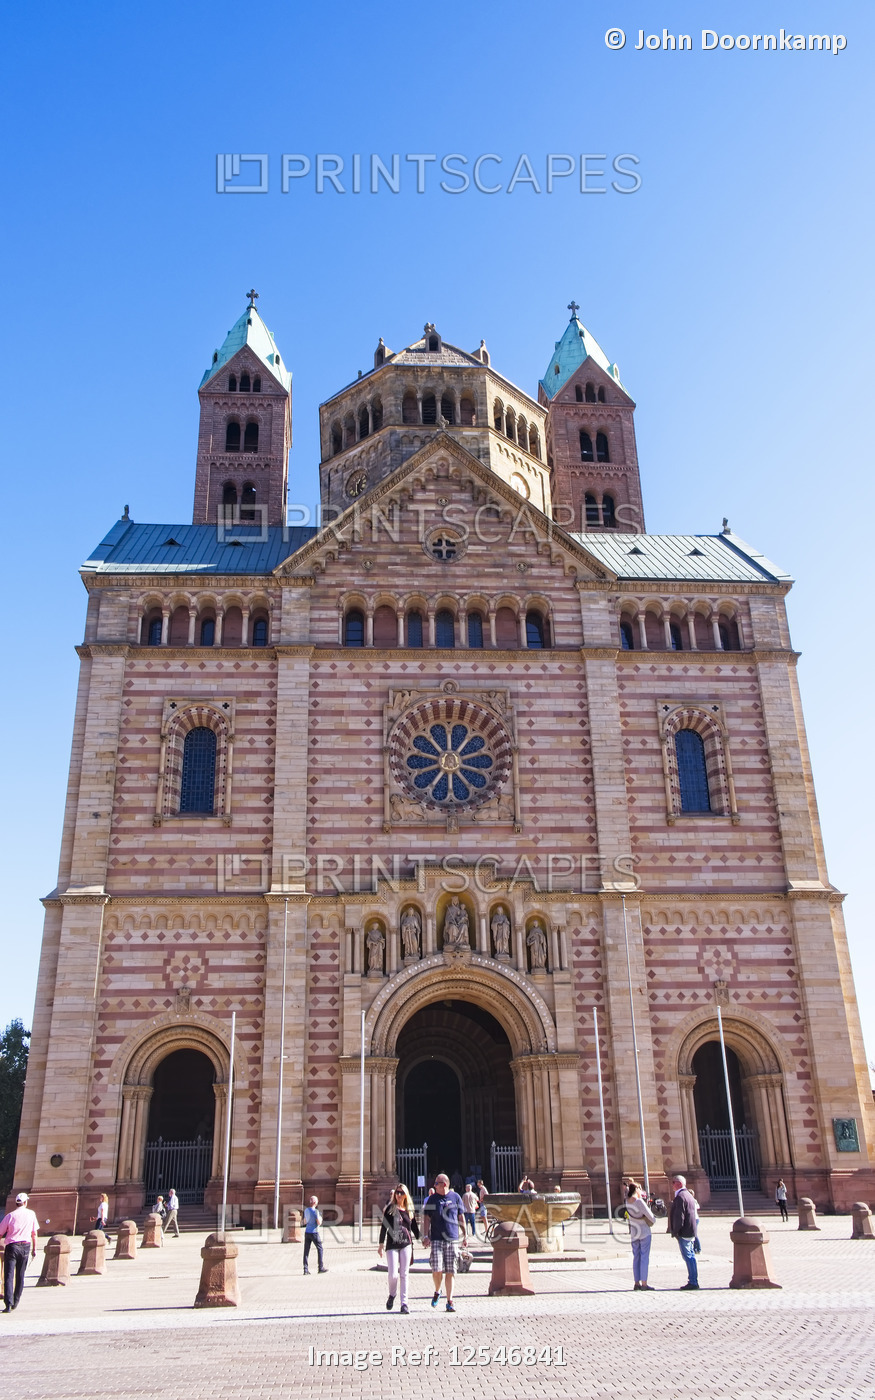 SPEYER IMPERIAL CATHEDRAL BASILICA OF THE ASSUMPTION AND ST STEPHEN FRONT VIEW